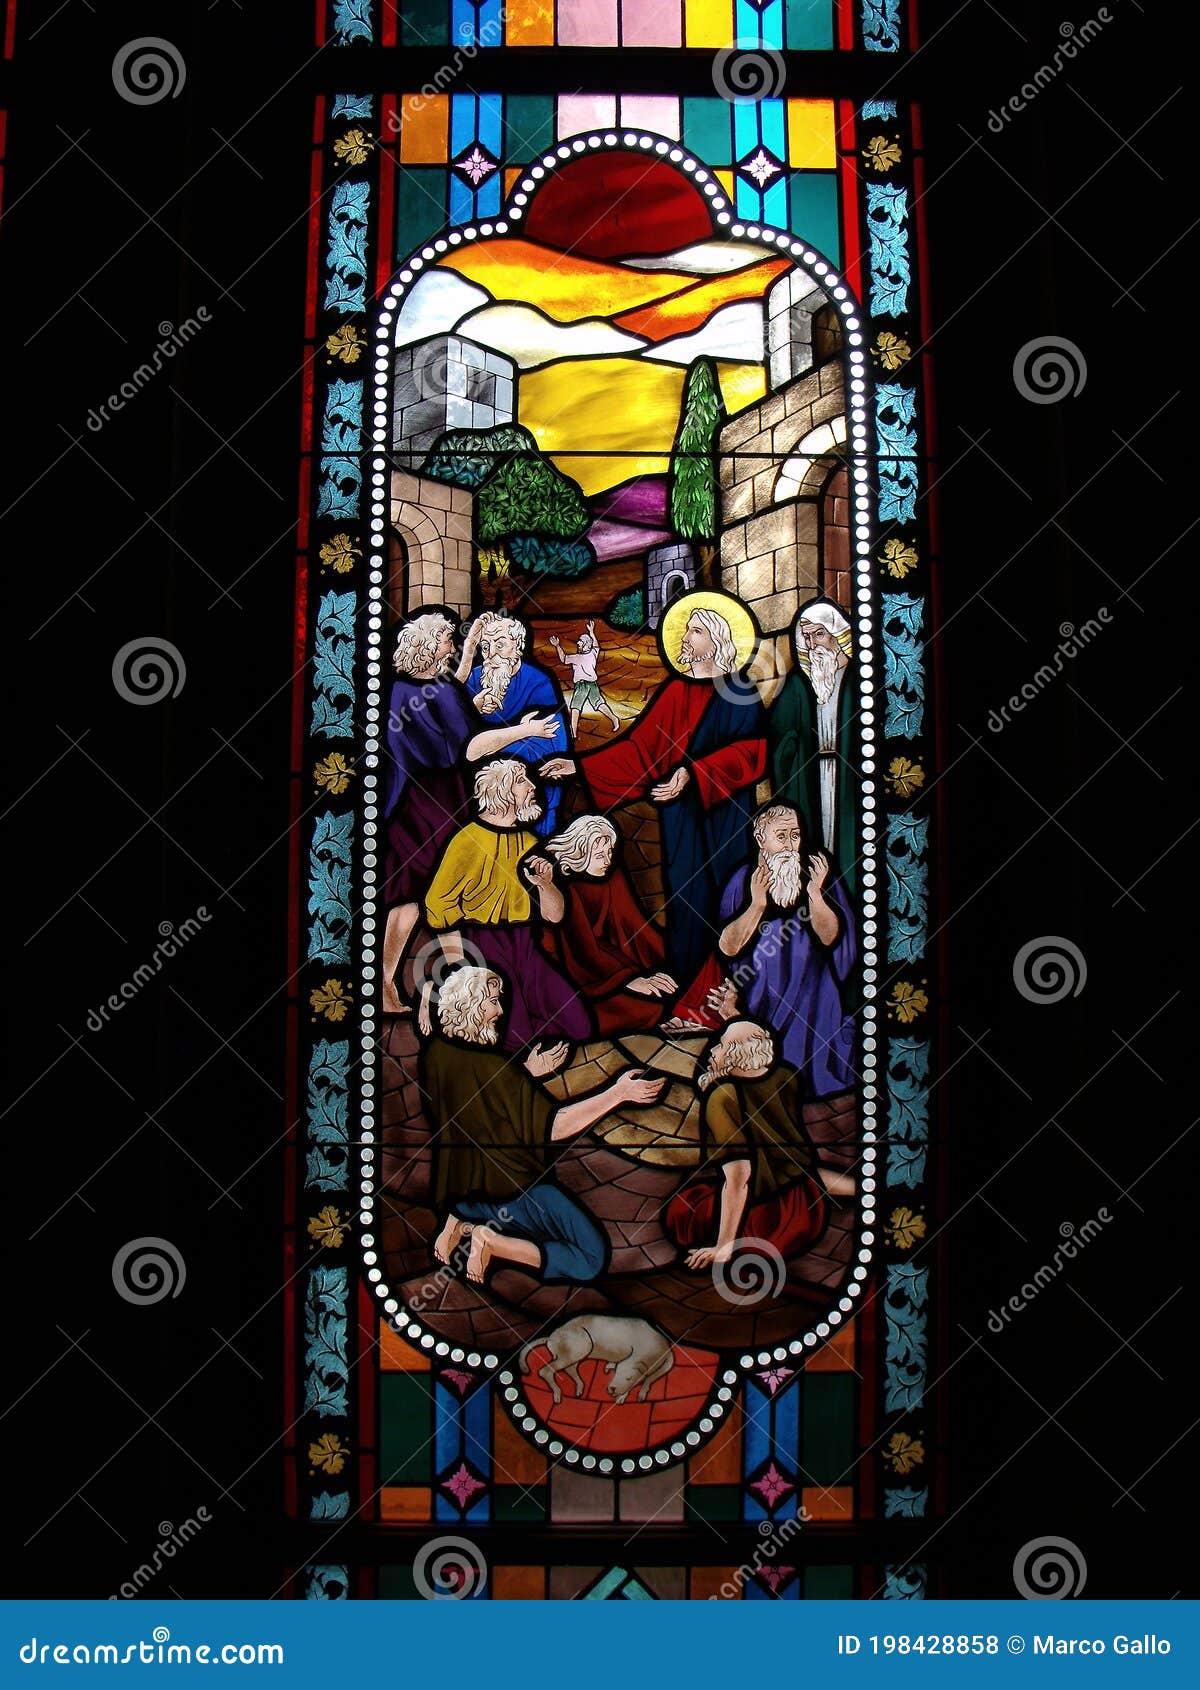 A Religious Image of the Bible on a Stained Glass Window in the ...